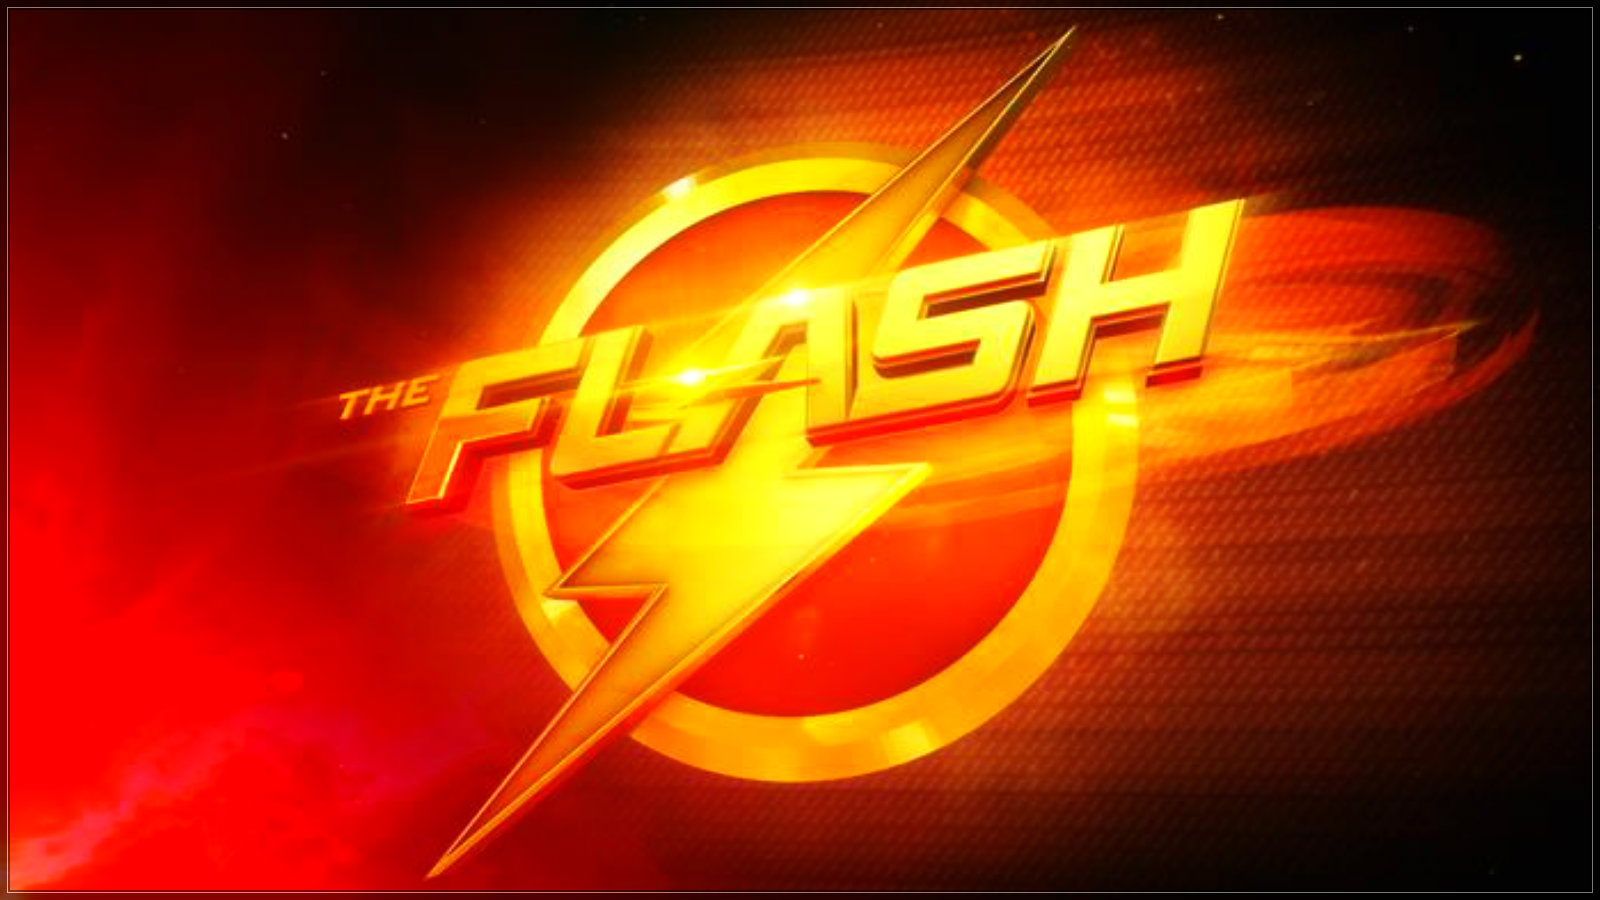 The Flash   The Flash CW Wallpaper 37656143